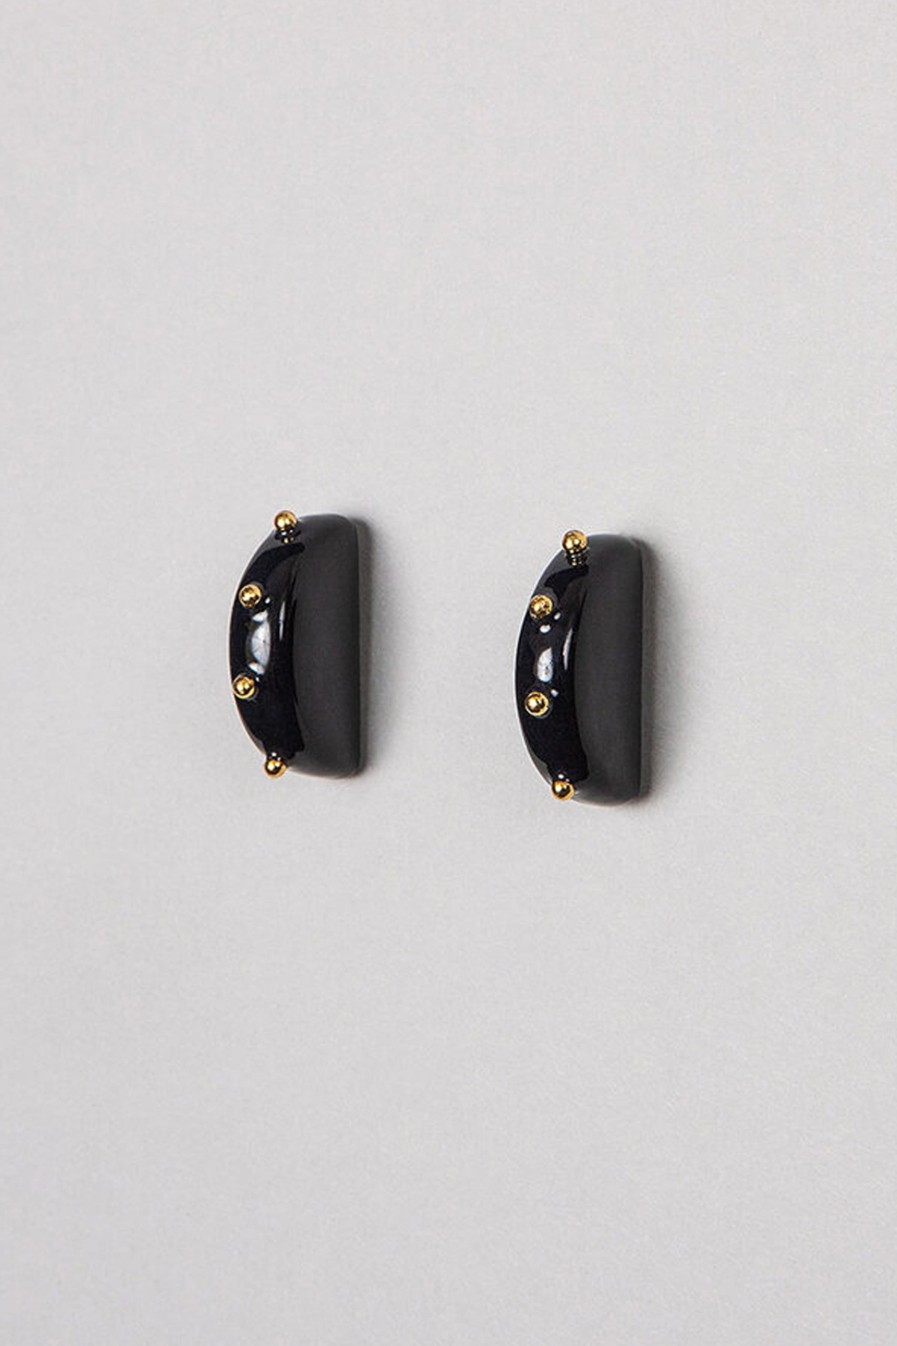 ABE Earrings semicircle black / gold accents